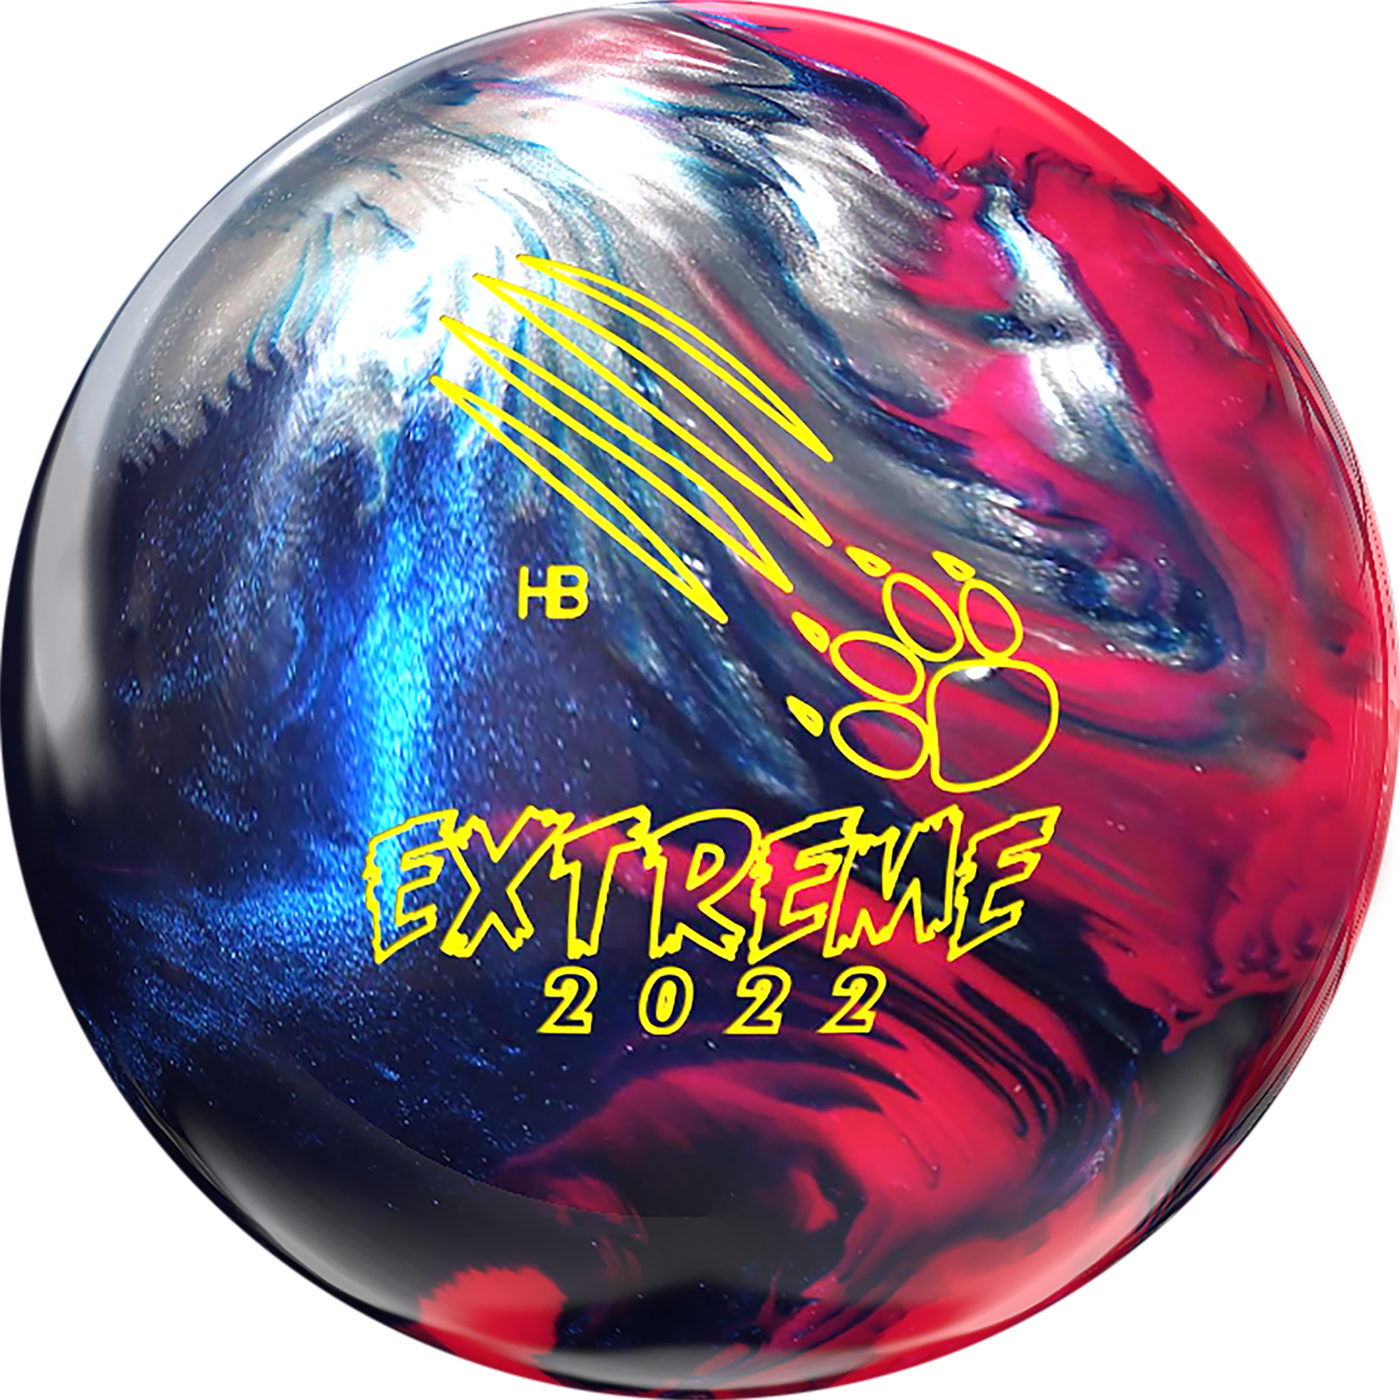 900 Global Honey Badger Extreme 2022 Bowling Ball Questions & Answers